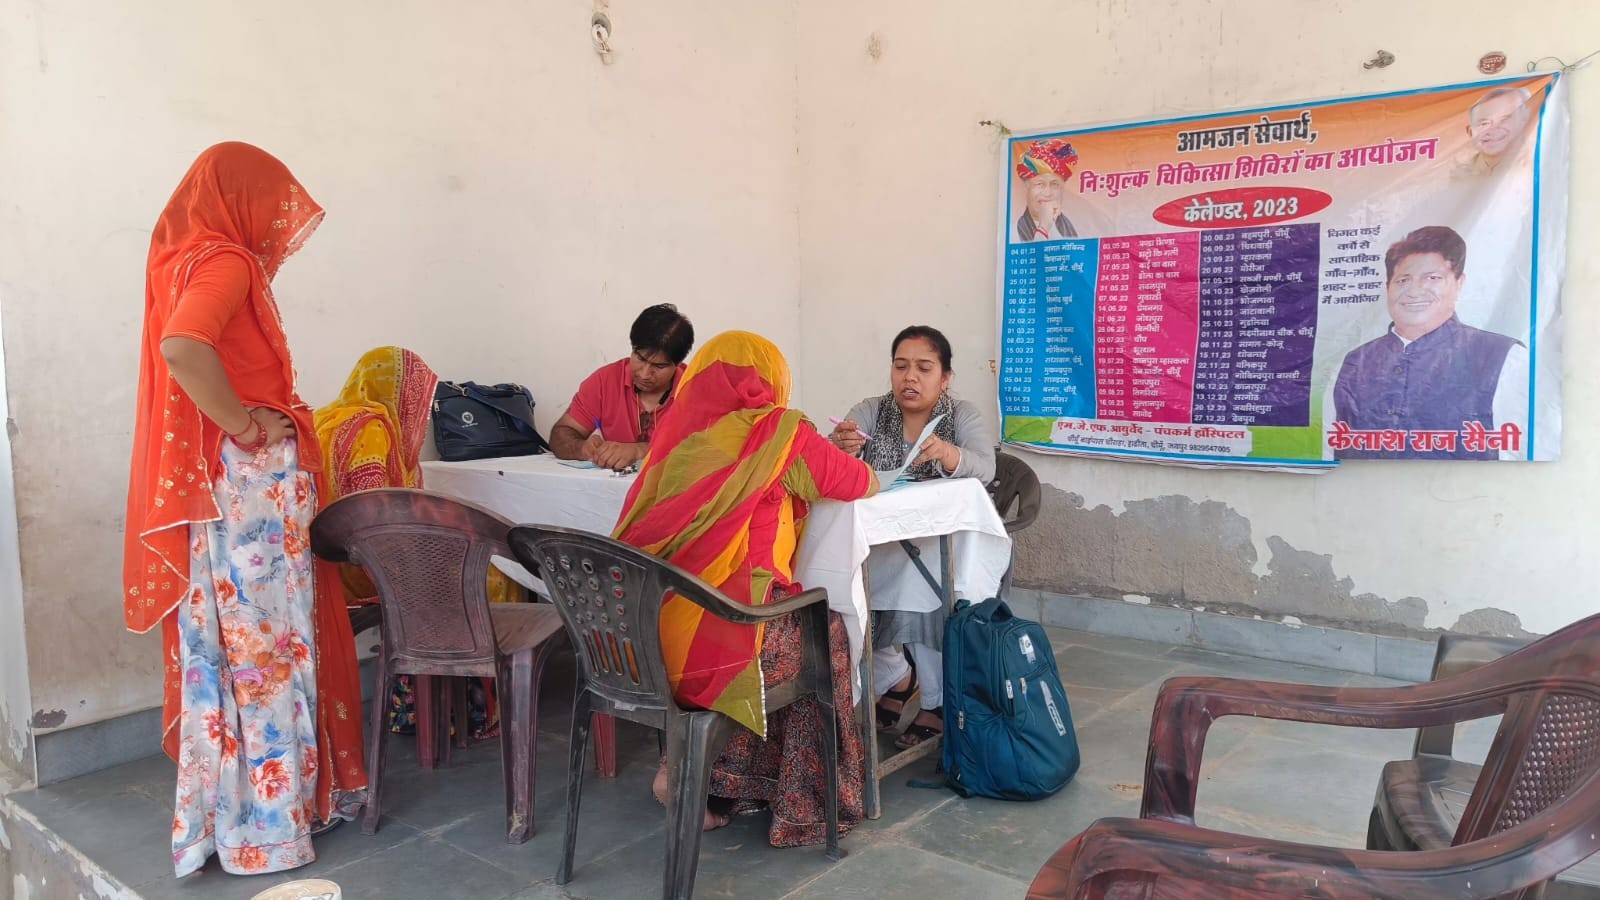 WEEKLY FREE MEDICAL CAMP ORGANIZED AT VILLAGE BAI KA BASS, CHOMU ON DATED 17 May 2023 PER SCHEDULE